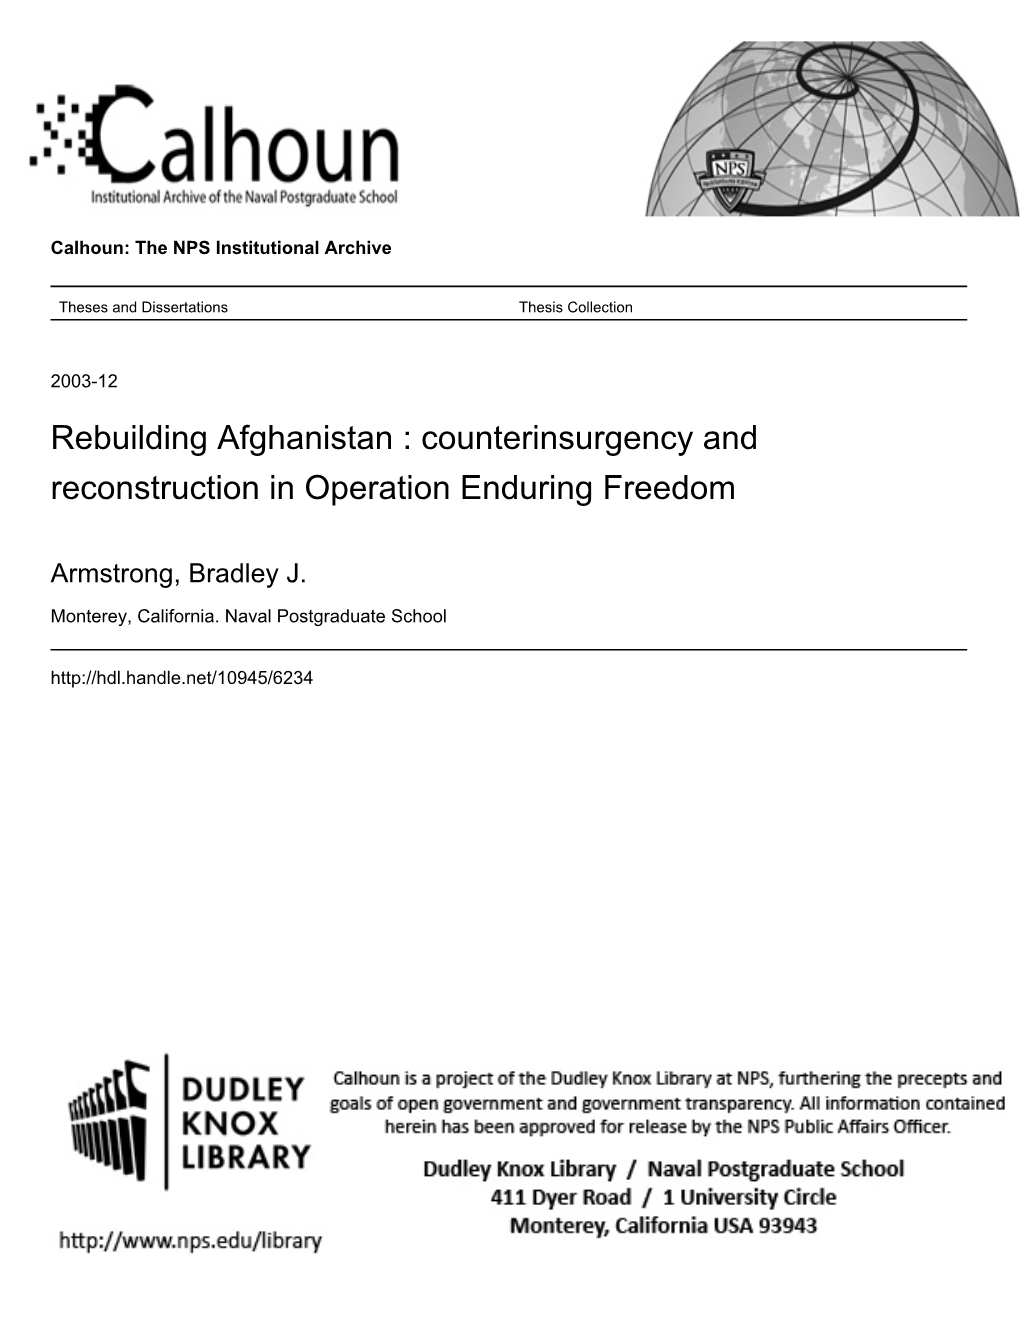 Rebuilding Afghanistan : Counterinsurgency and Reconstruction in Operation Enduring Freedom